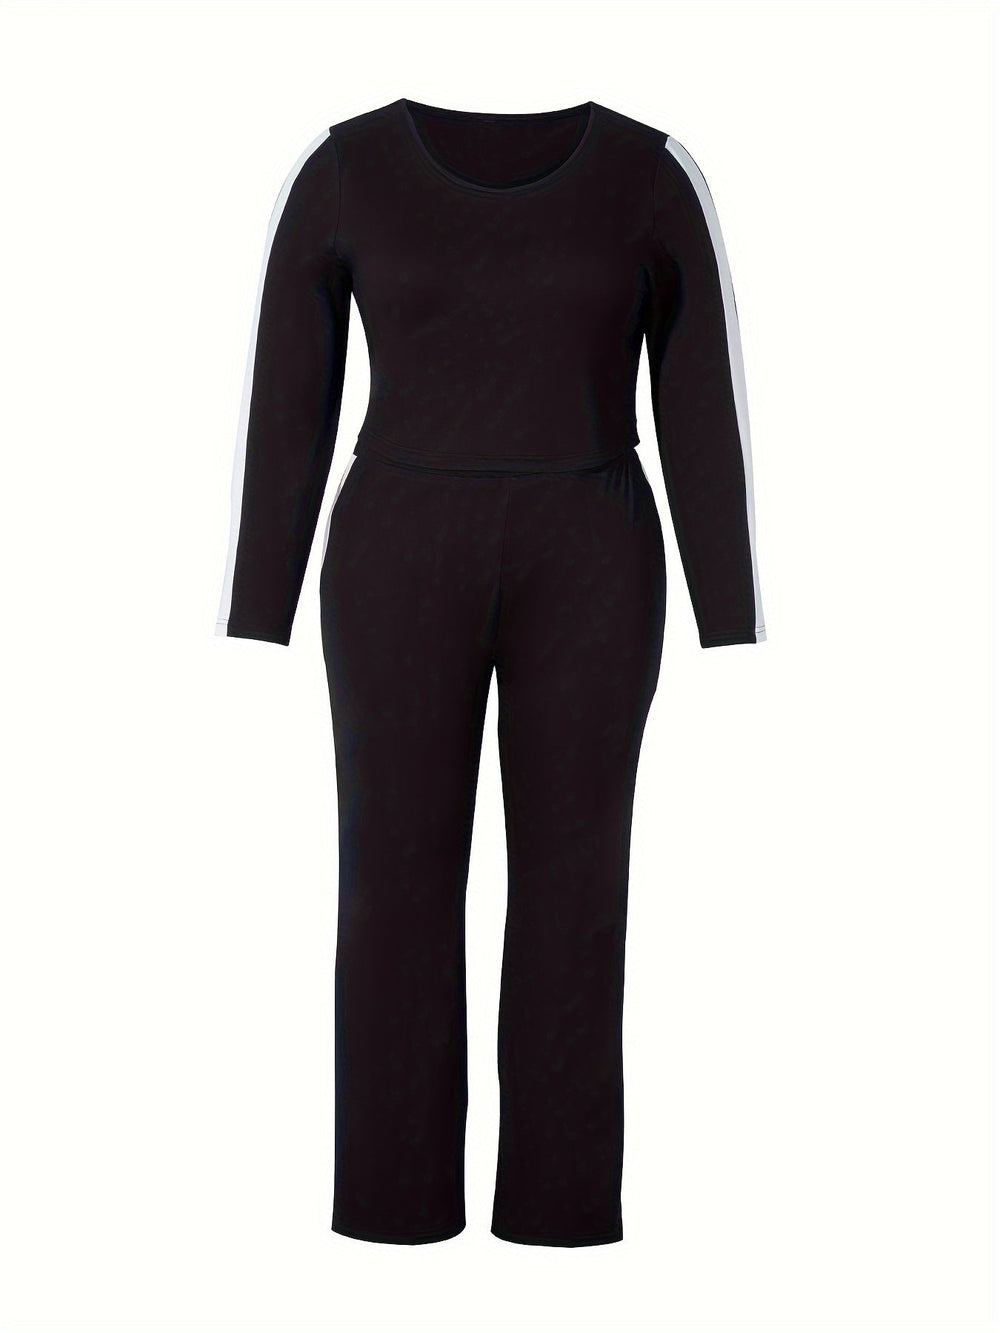 Sexy Striped Long Sleeve Form-fitting Top and Pants Activewear Set - Gen U Us Products